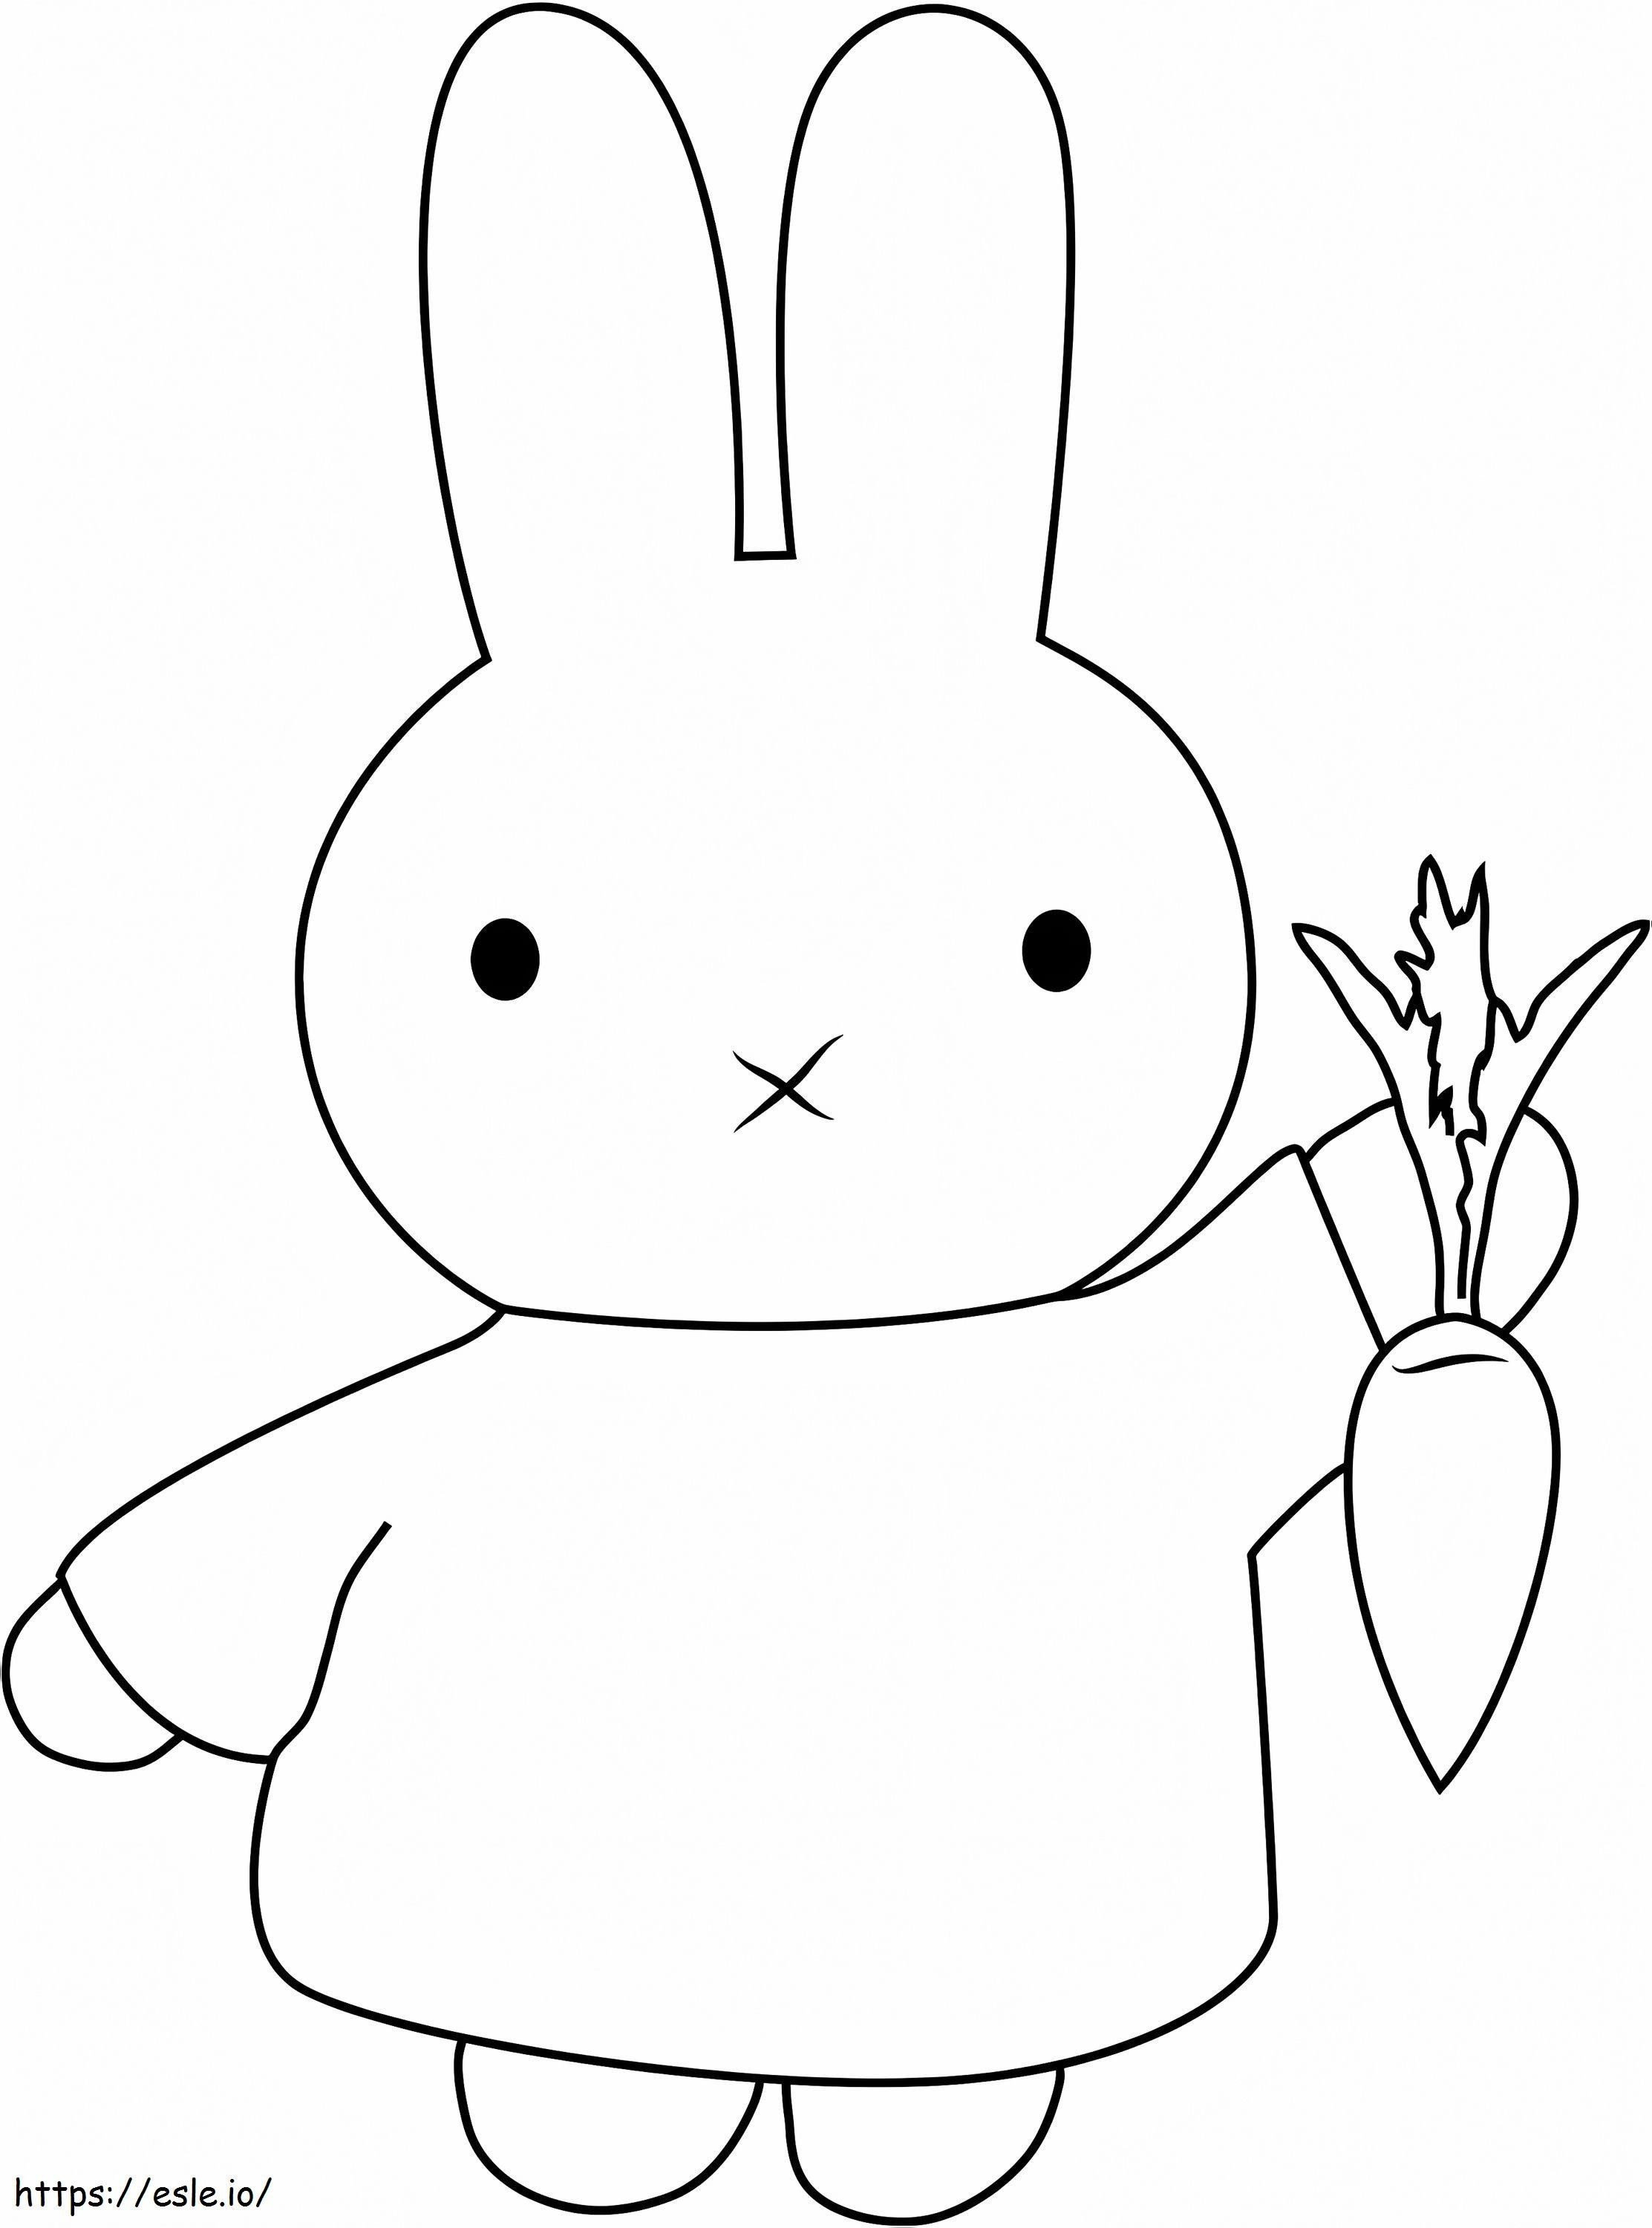 1531885666 Miffy Holding Carrot A4 coloring page